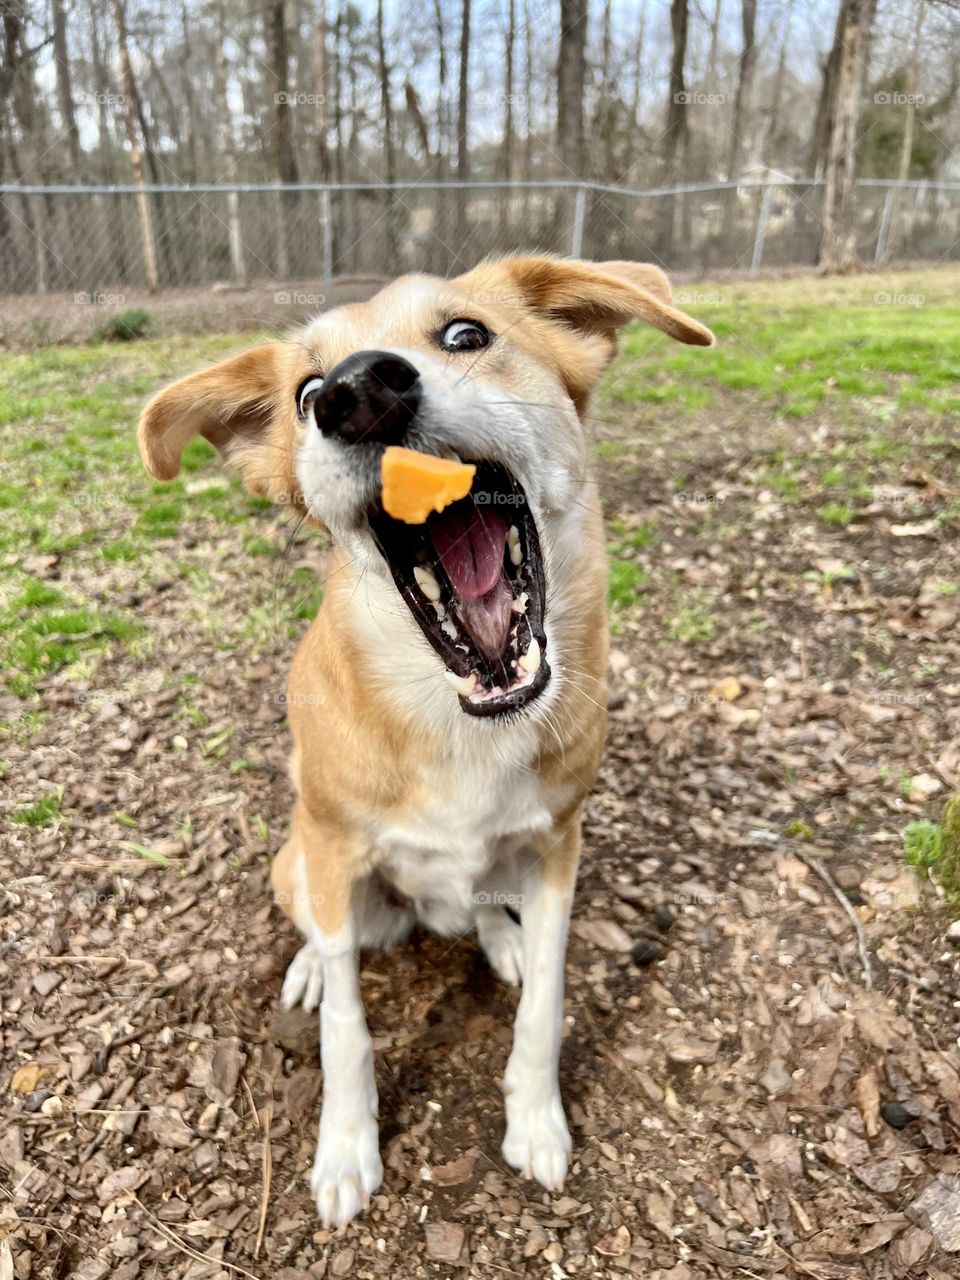 Pet dog with mouth open wide lunging to catch a tossed treat. She looks excited and happy in her backyard.